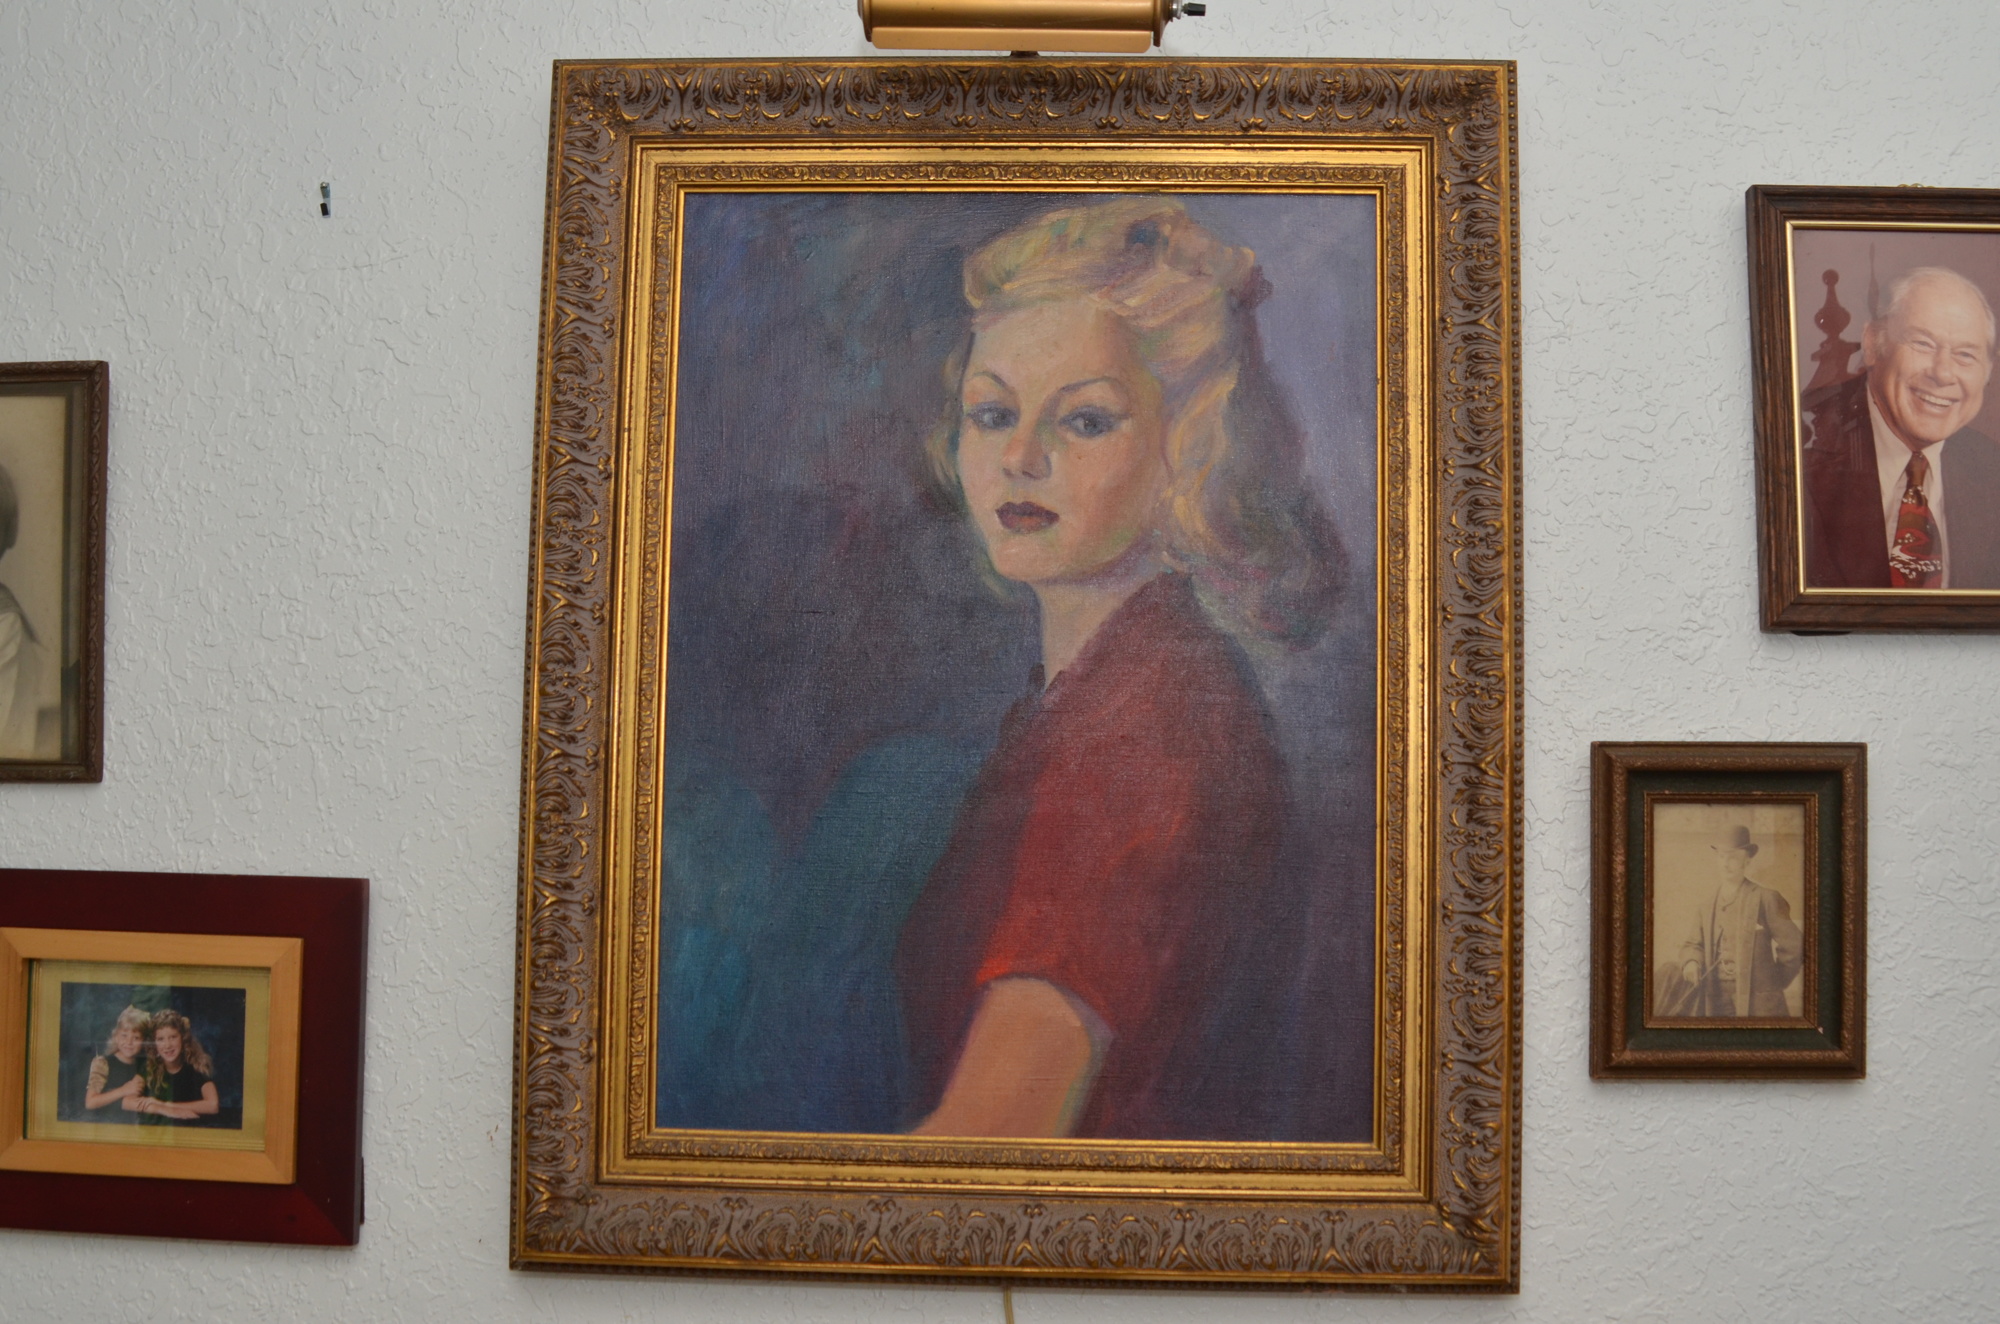 Marilee Griffin Ivy’s portrait was painted when she was 17 years old and living in New York City.